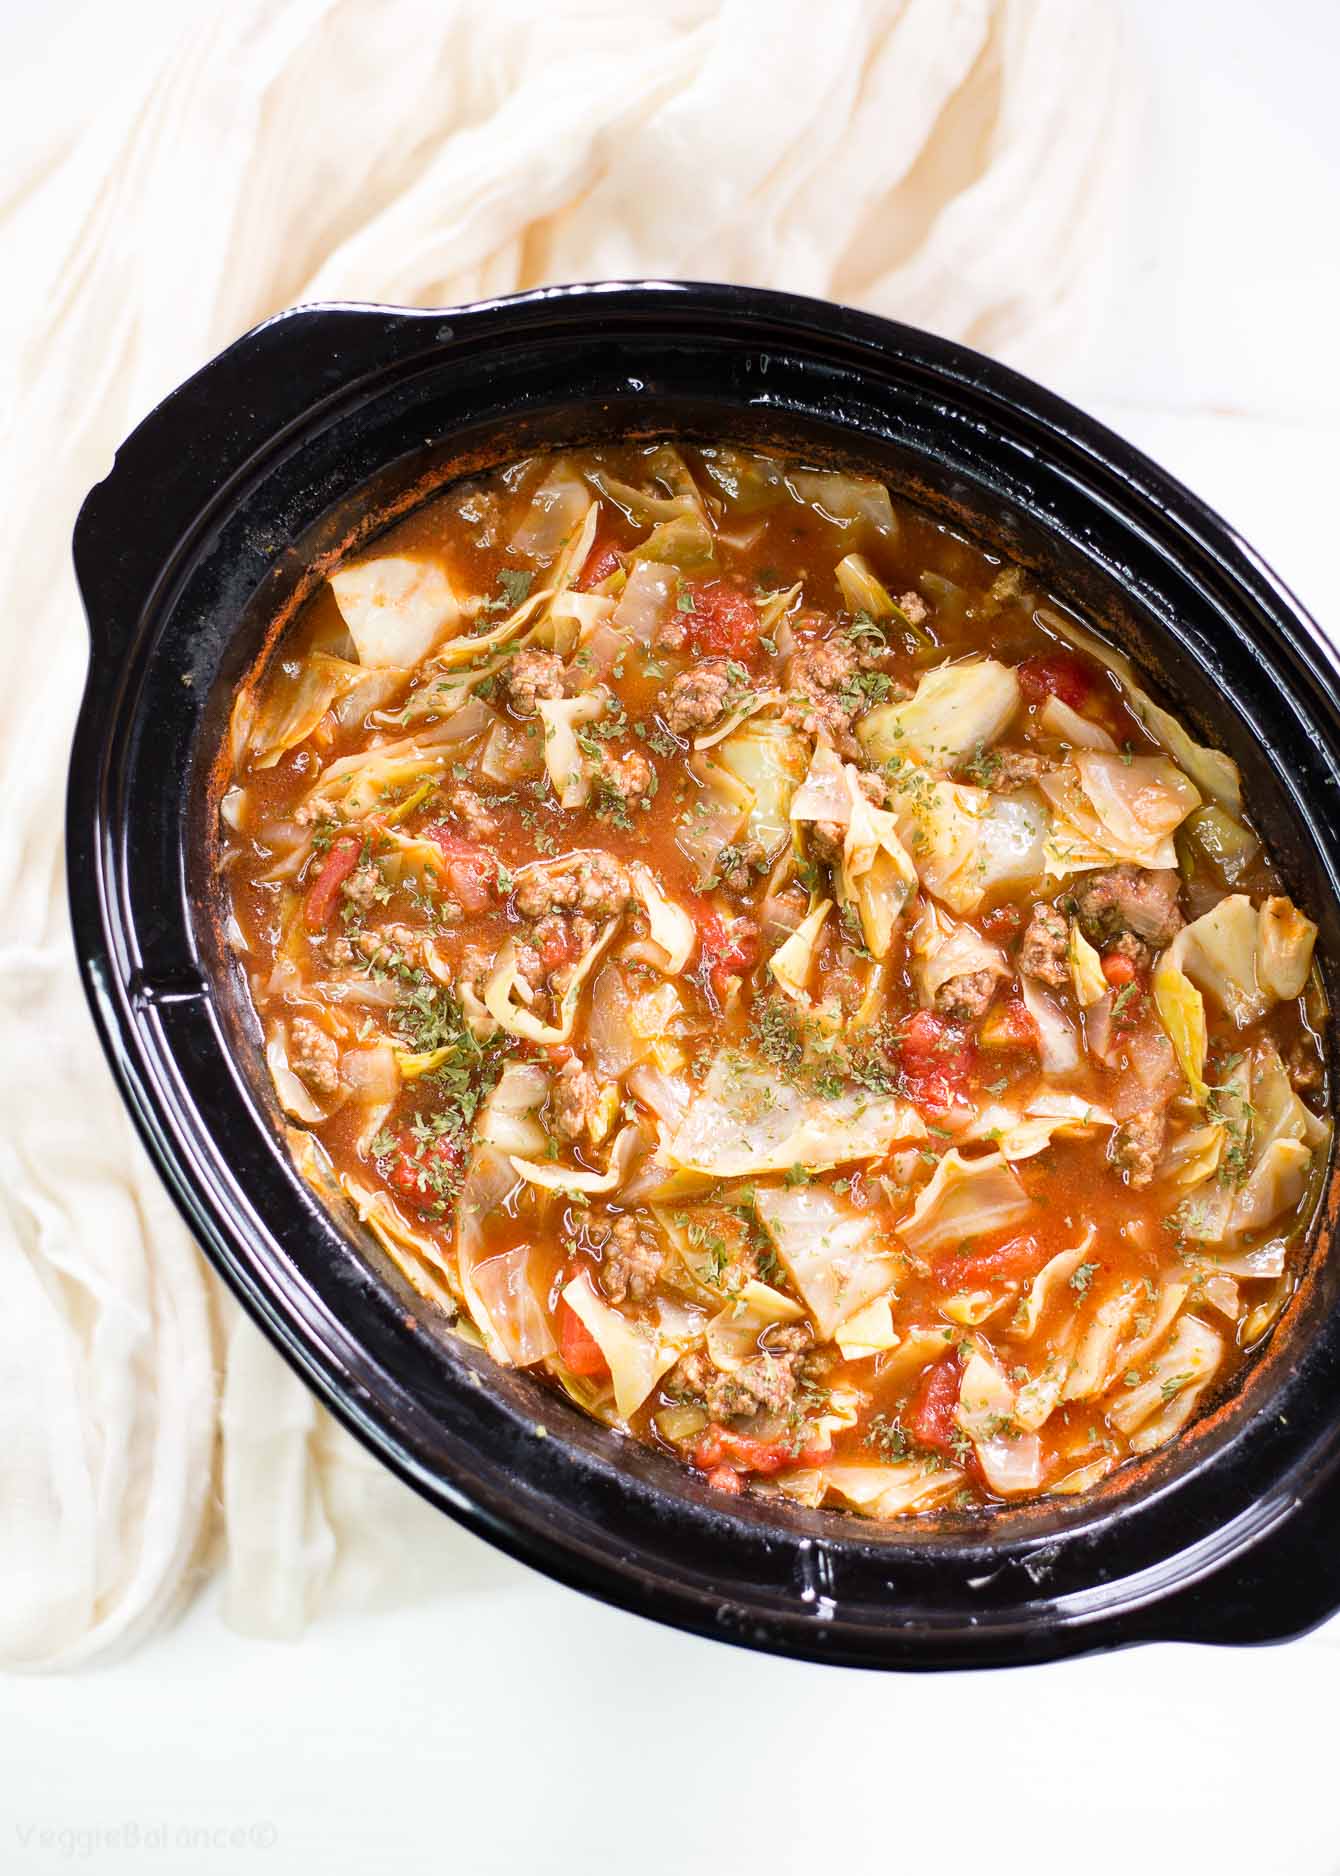 Slow Cooker Cabbage Roll Soup Recipe